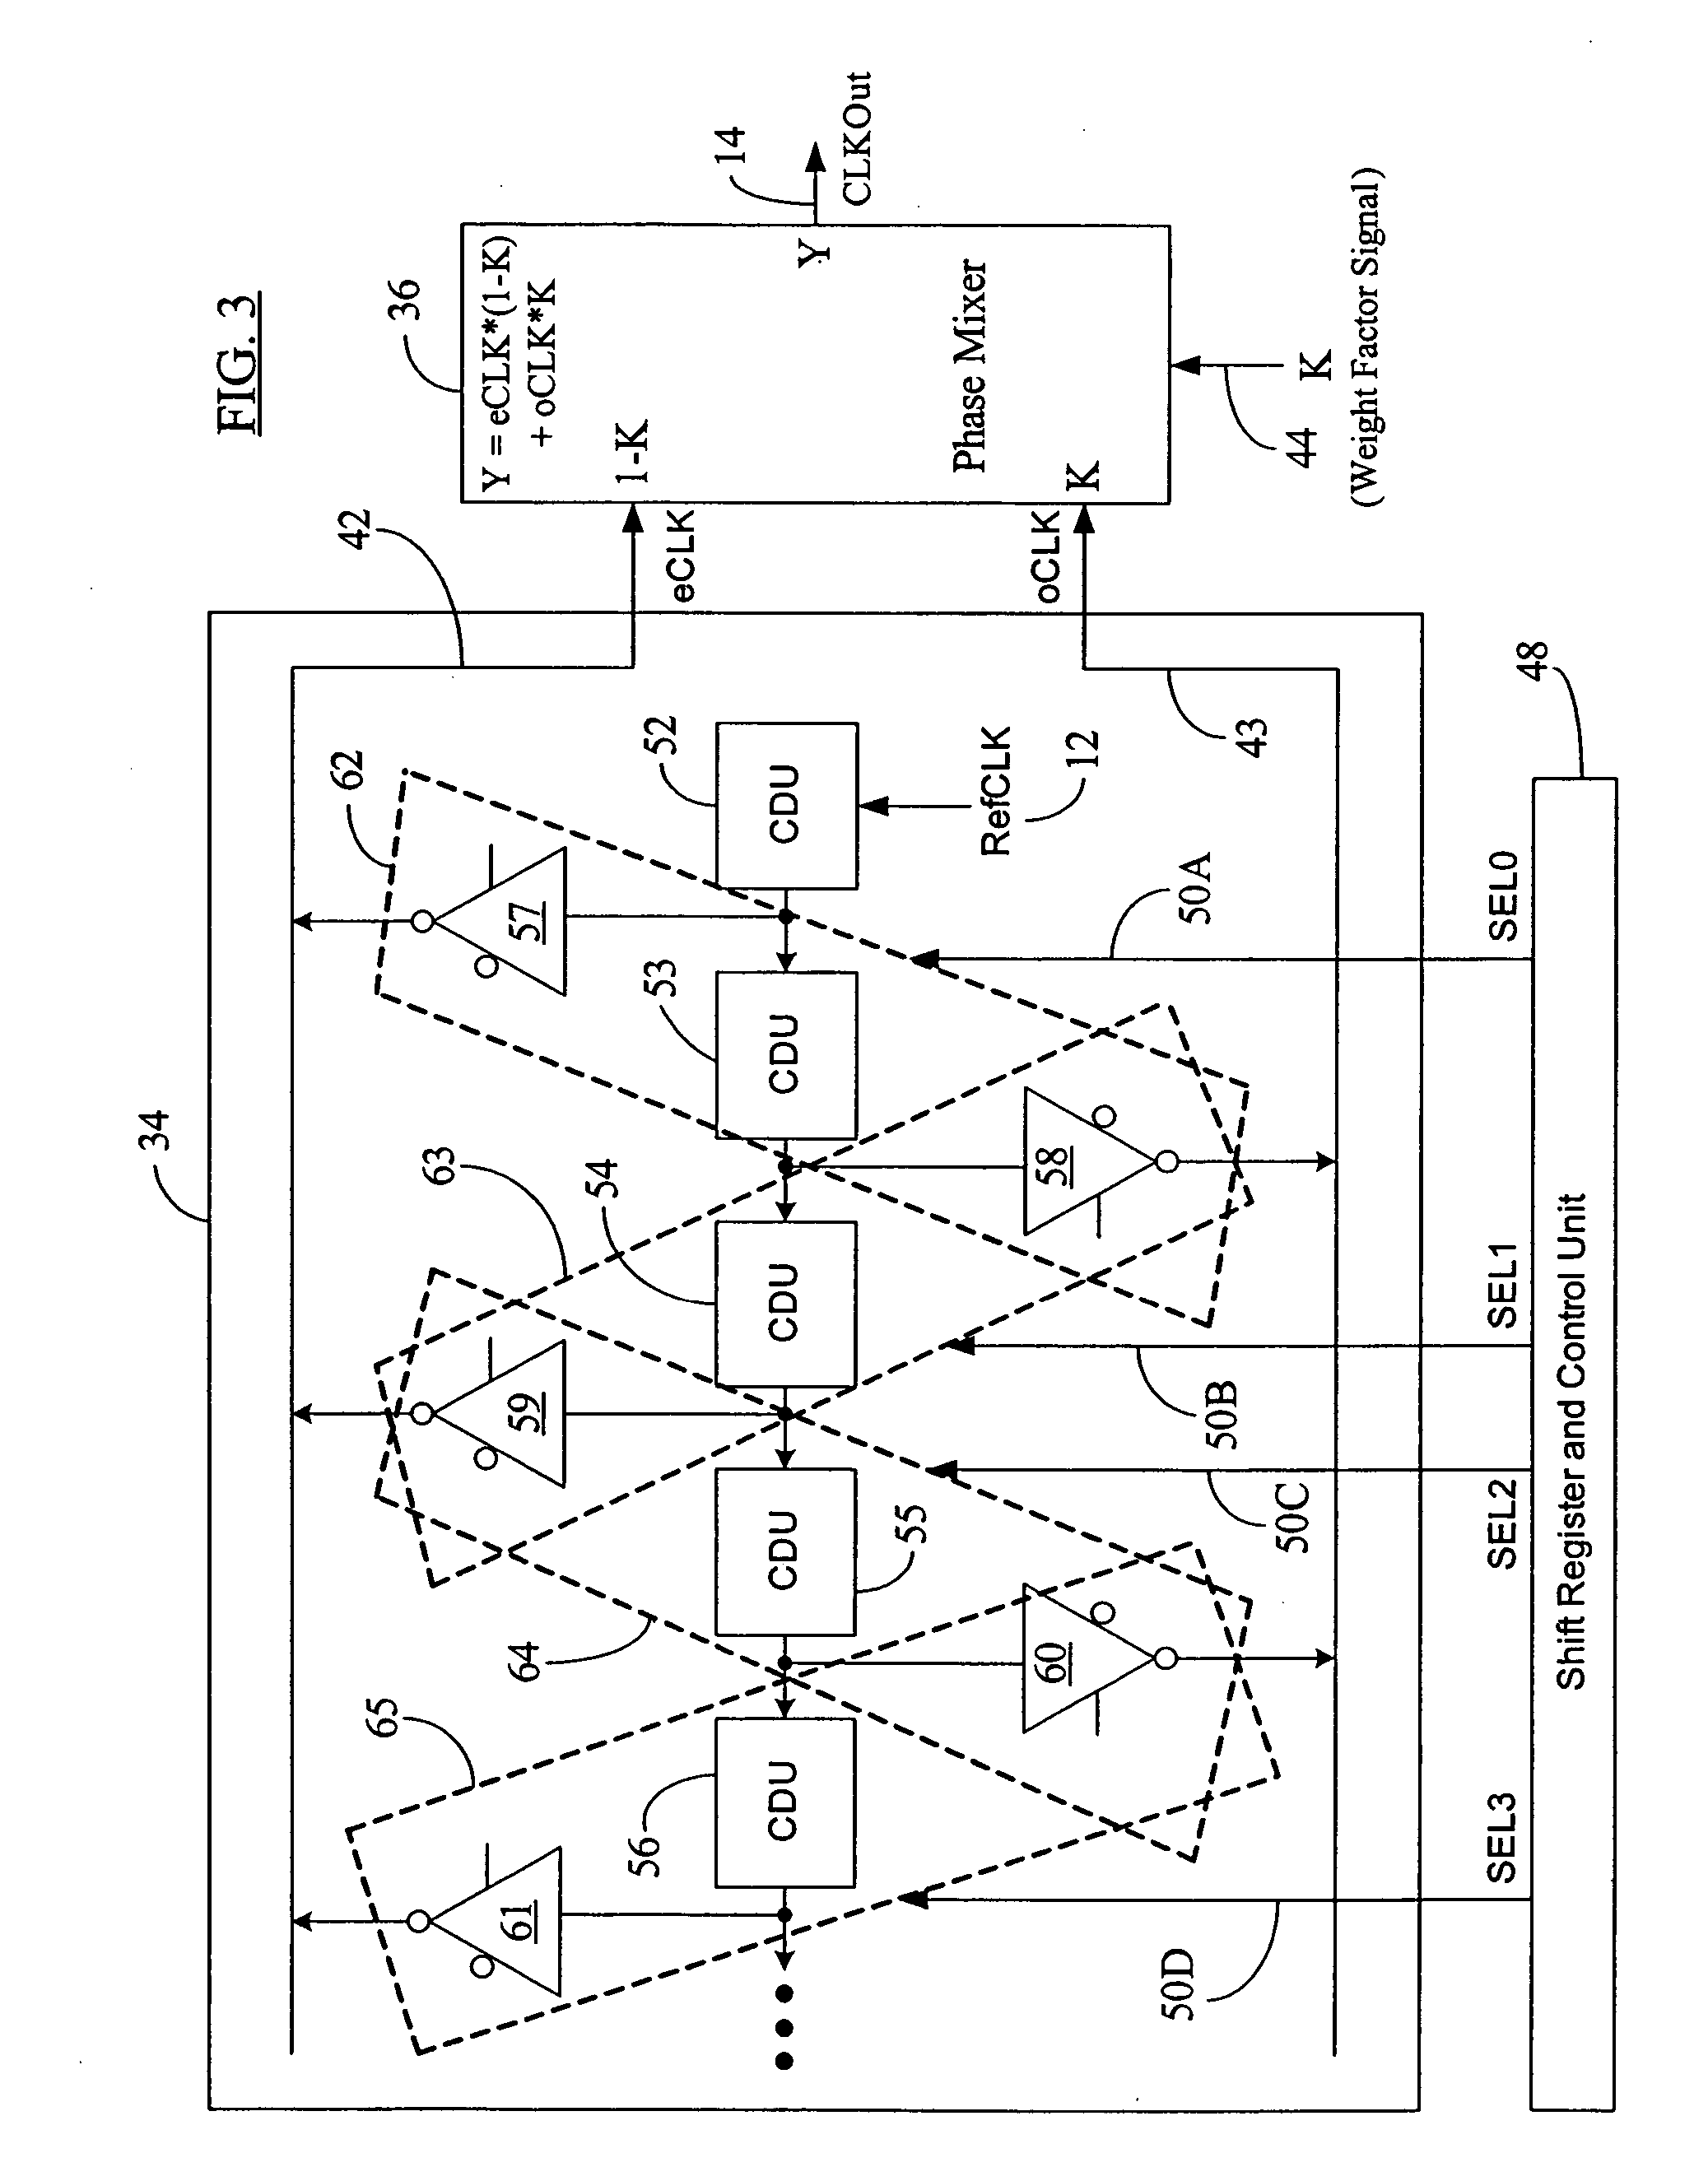 Seamless coarse and fine delay structure for high performance DLL